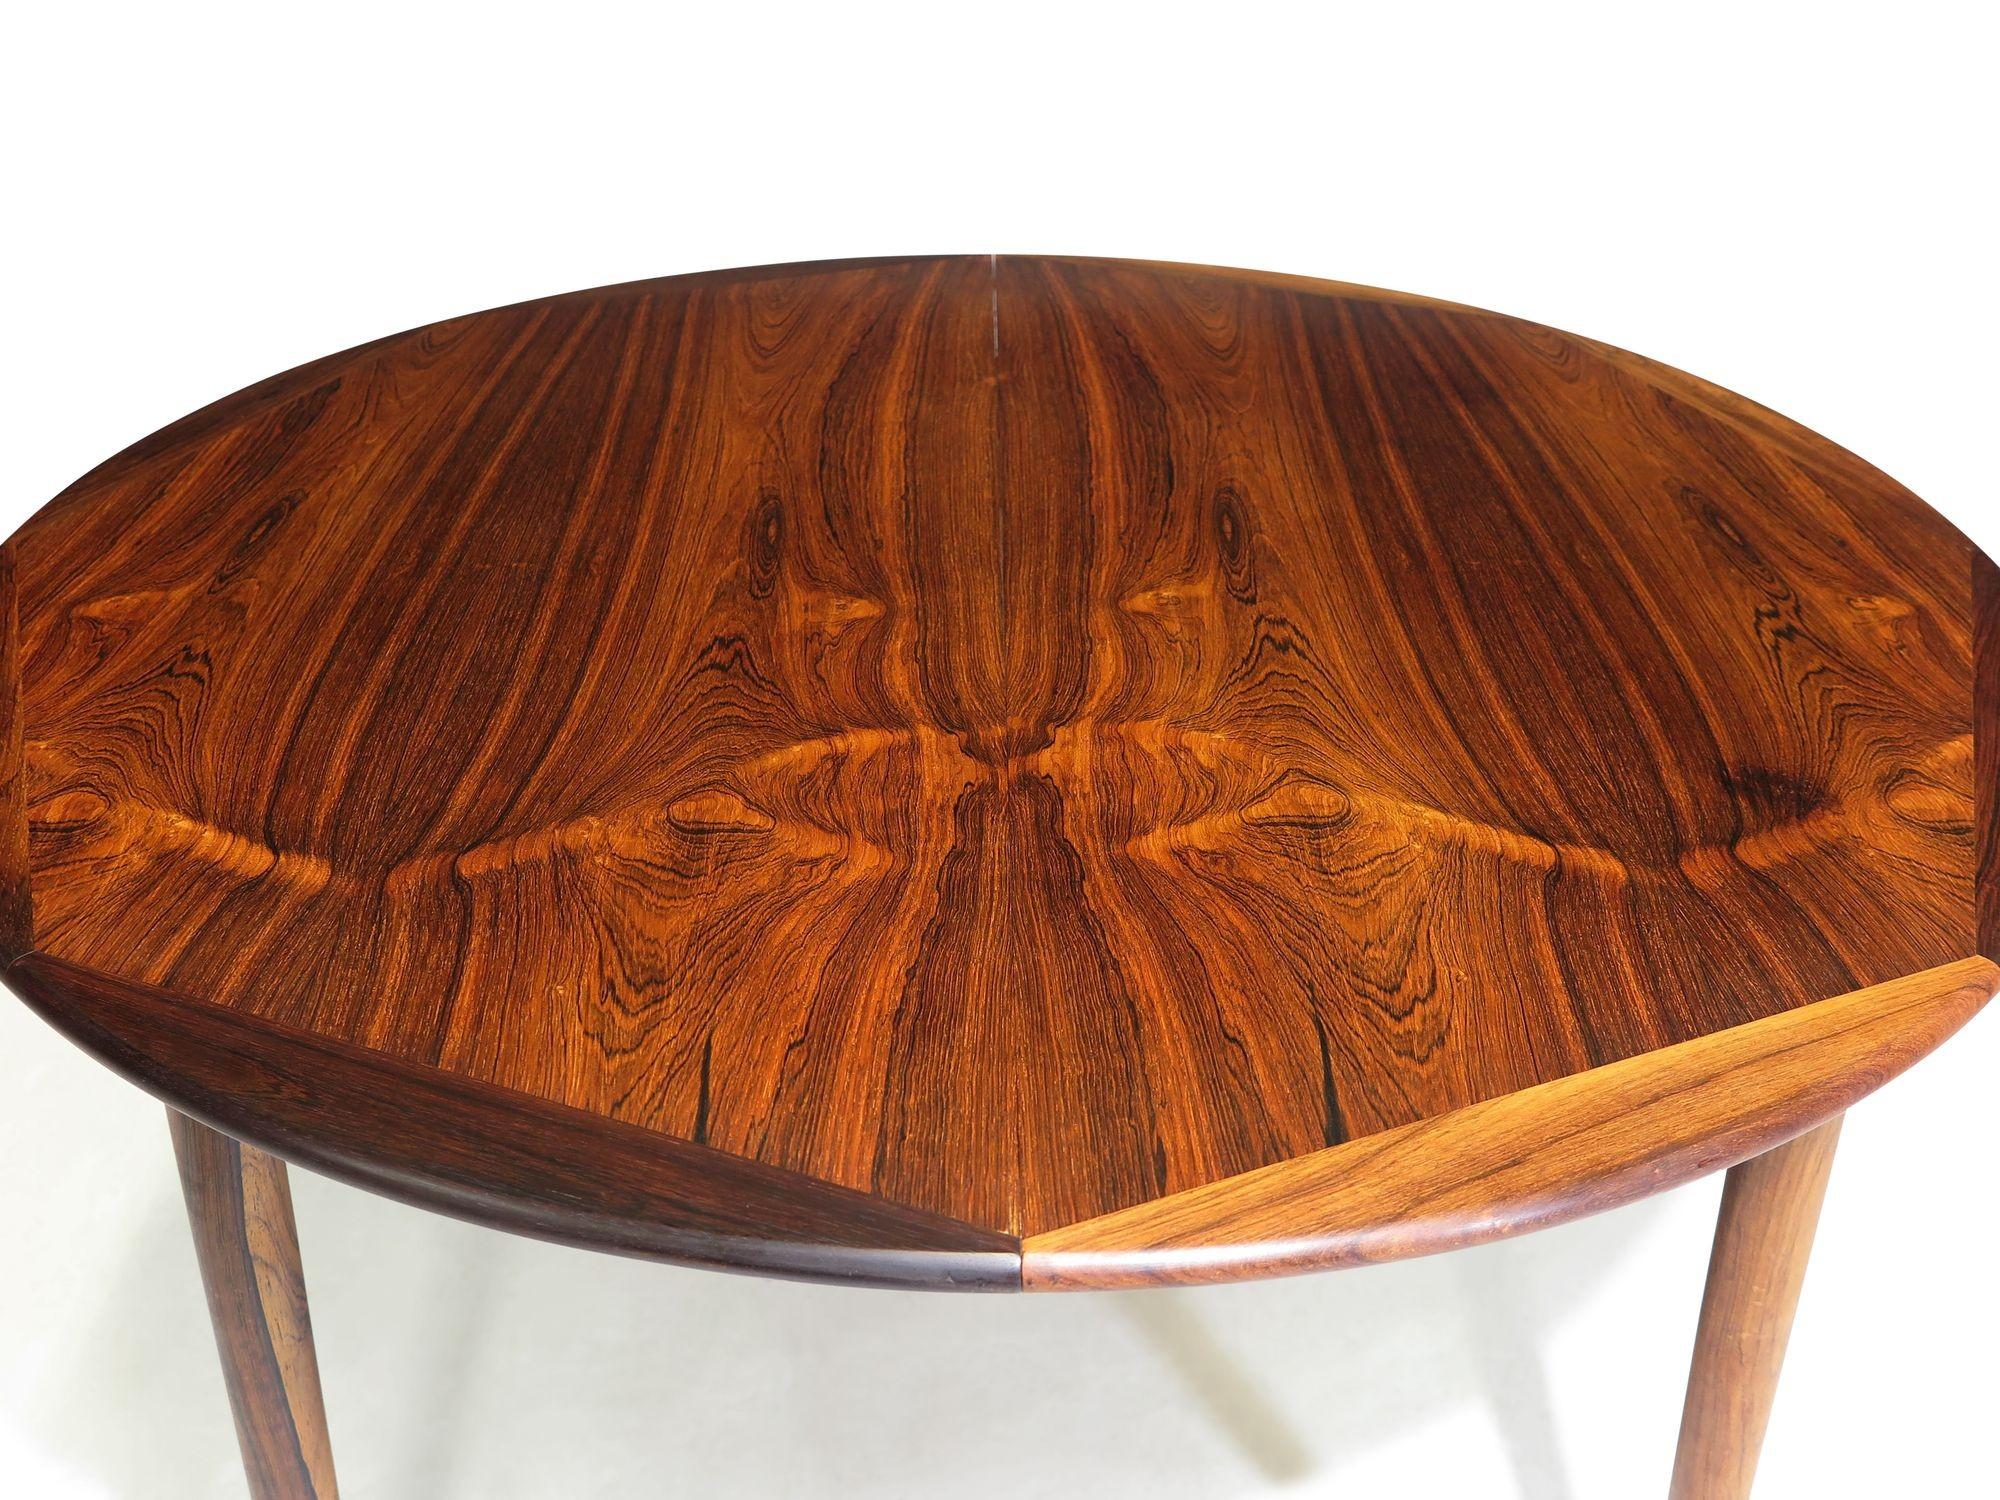 Mid-century Danish round dining table by Georg Petersens Mobelfabrik, 1963, Denmark. The table is crafted from stunning book-matched Brazilian rosewood with beautiful dynamic grain patters, and solid octagonal edge. The table comes with one center